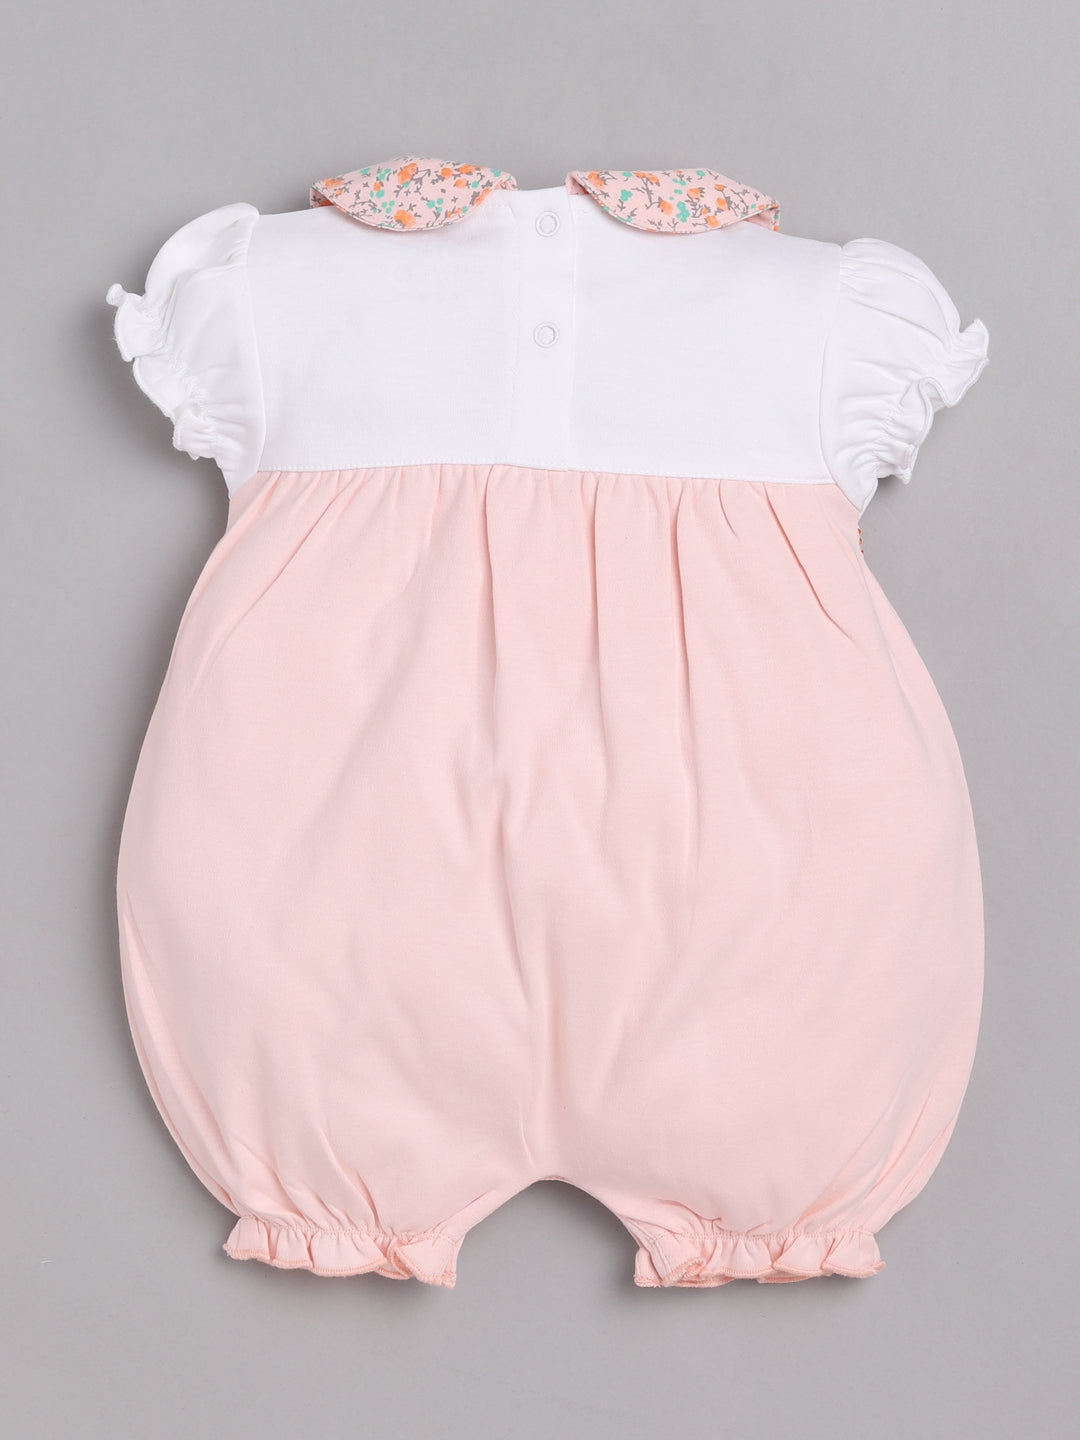 Half Sleeves Round neck Romper/Summer clothes/Creeper/new born/infent wear/ for Baby Girls 100% Pure Cotton-PEACH